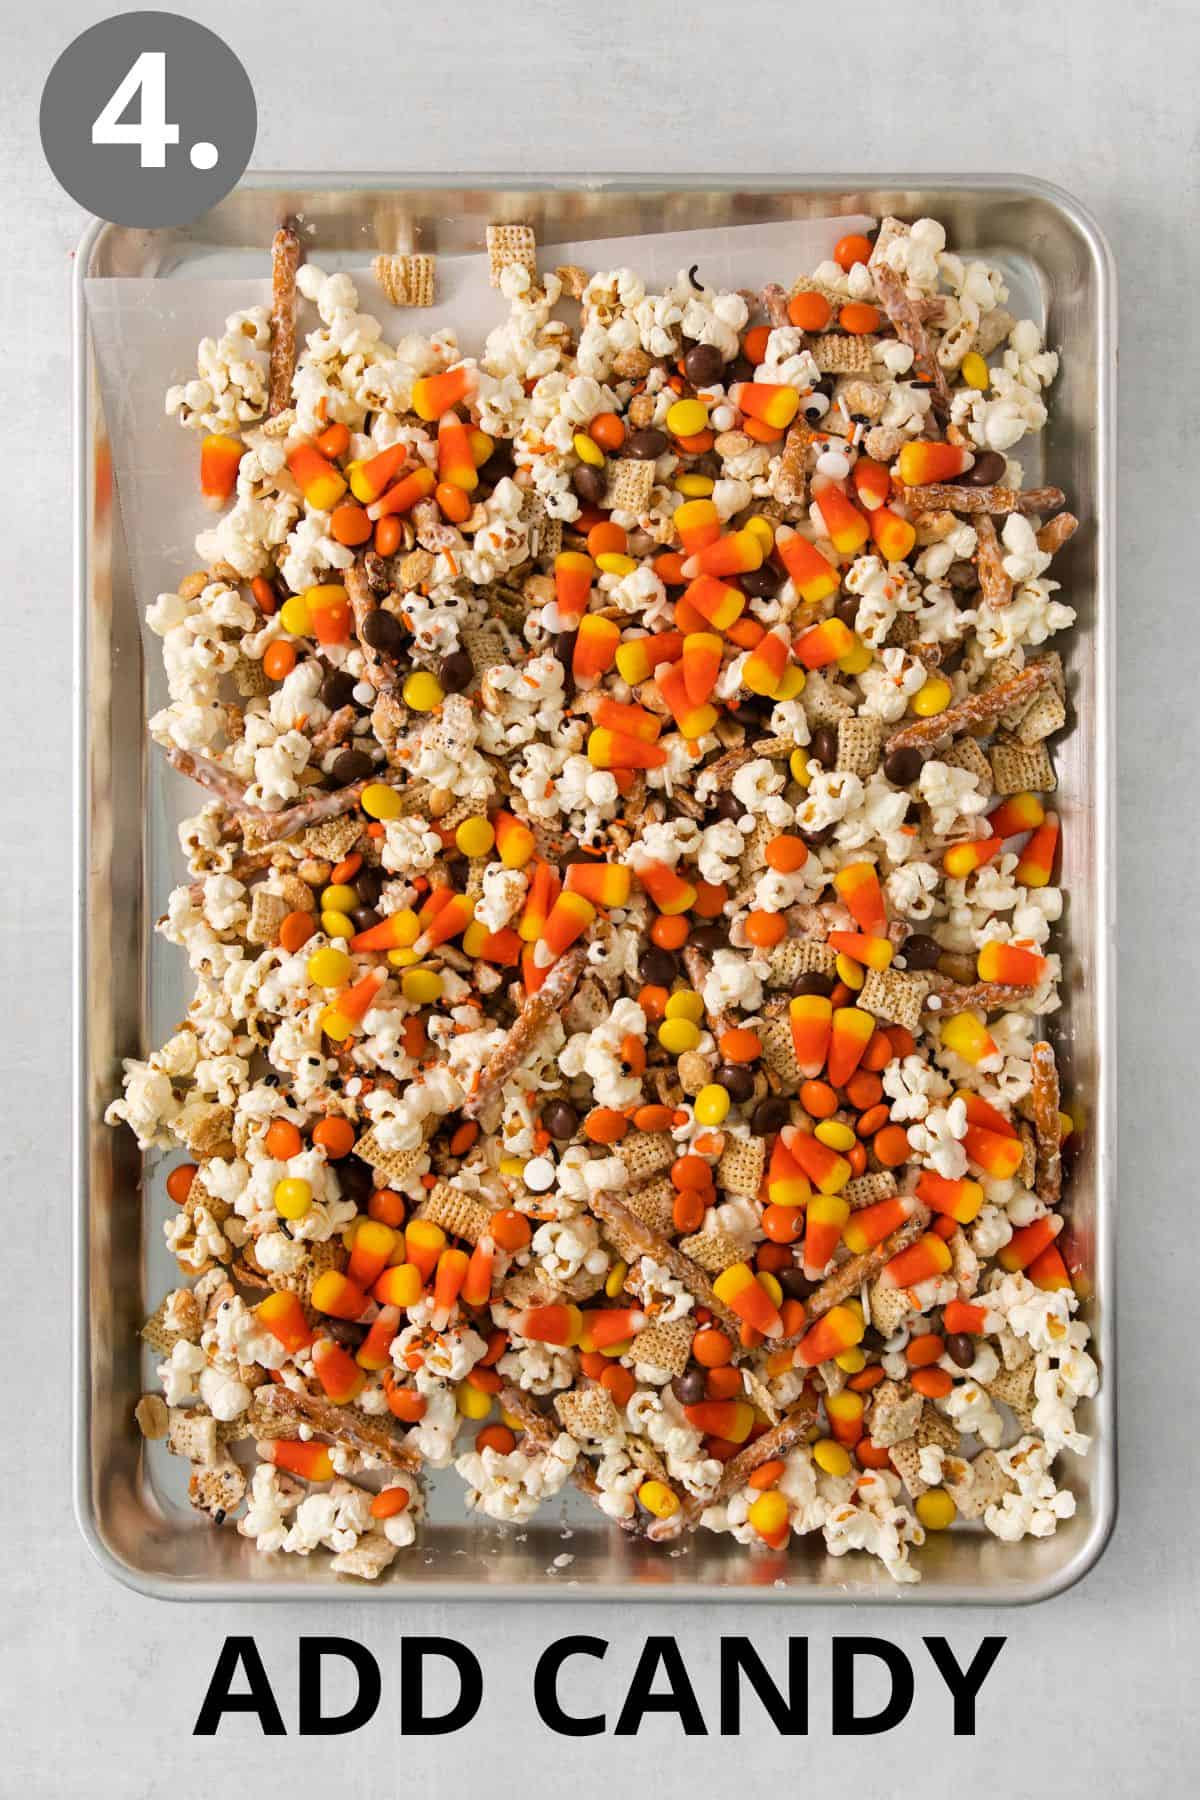 Snack mix and candy added to a baking sheet